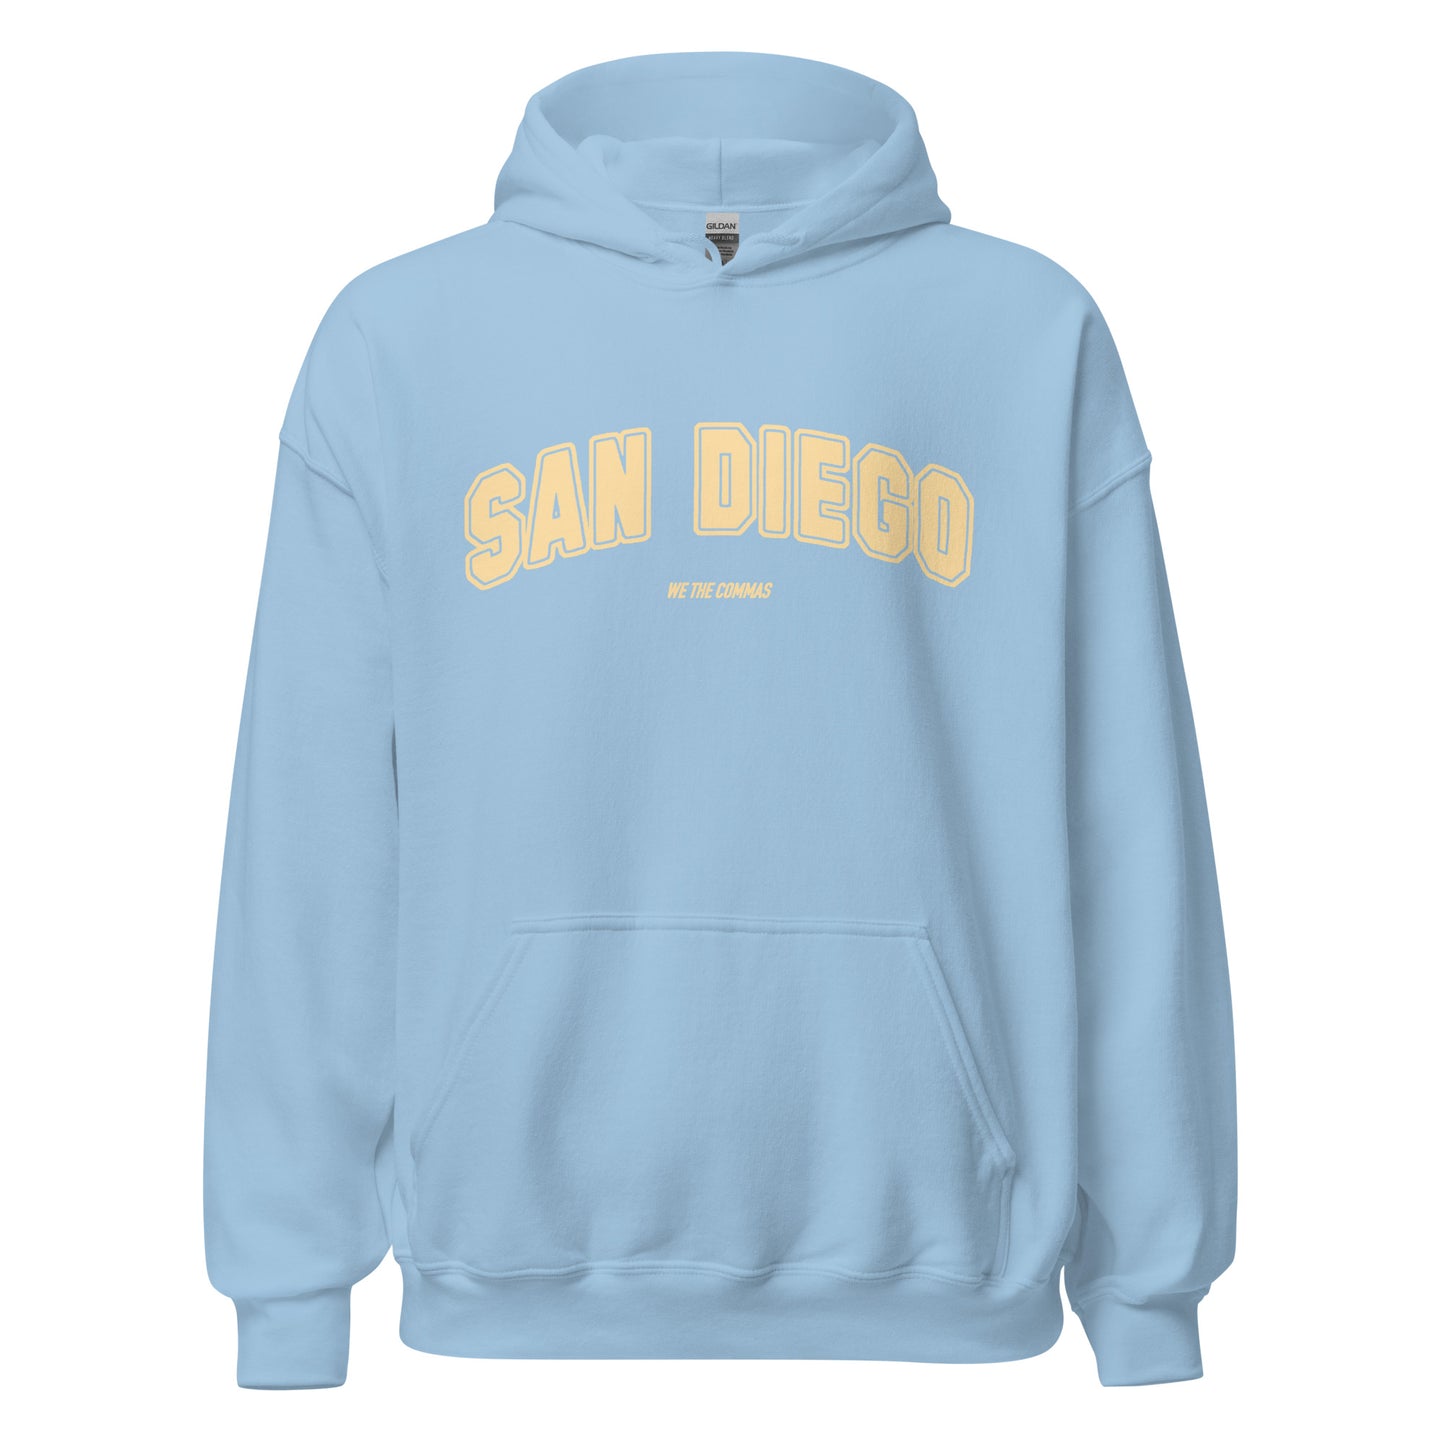 SAN DIEGO SPECIAL EDITION HOODIE